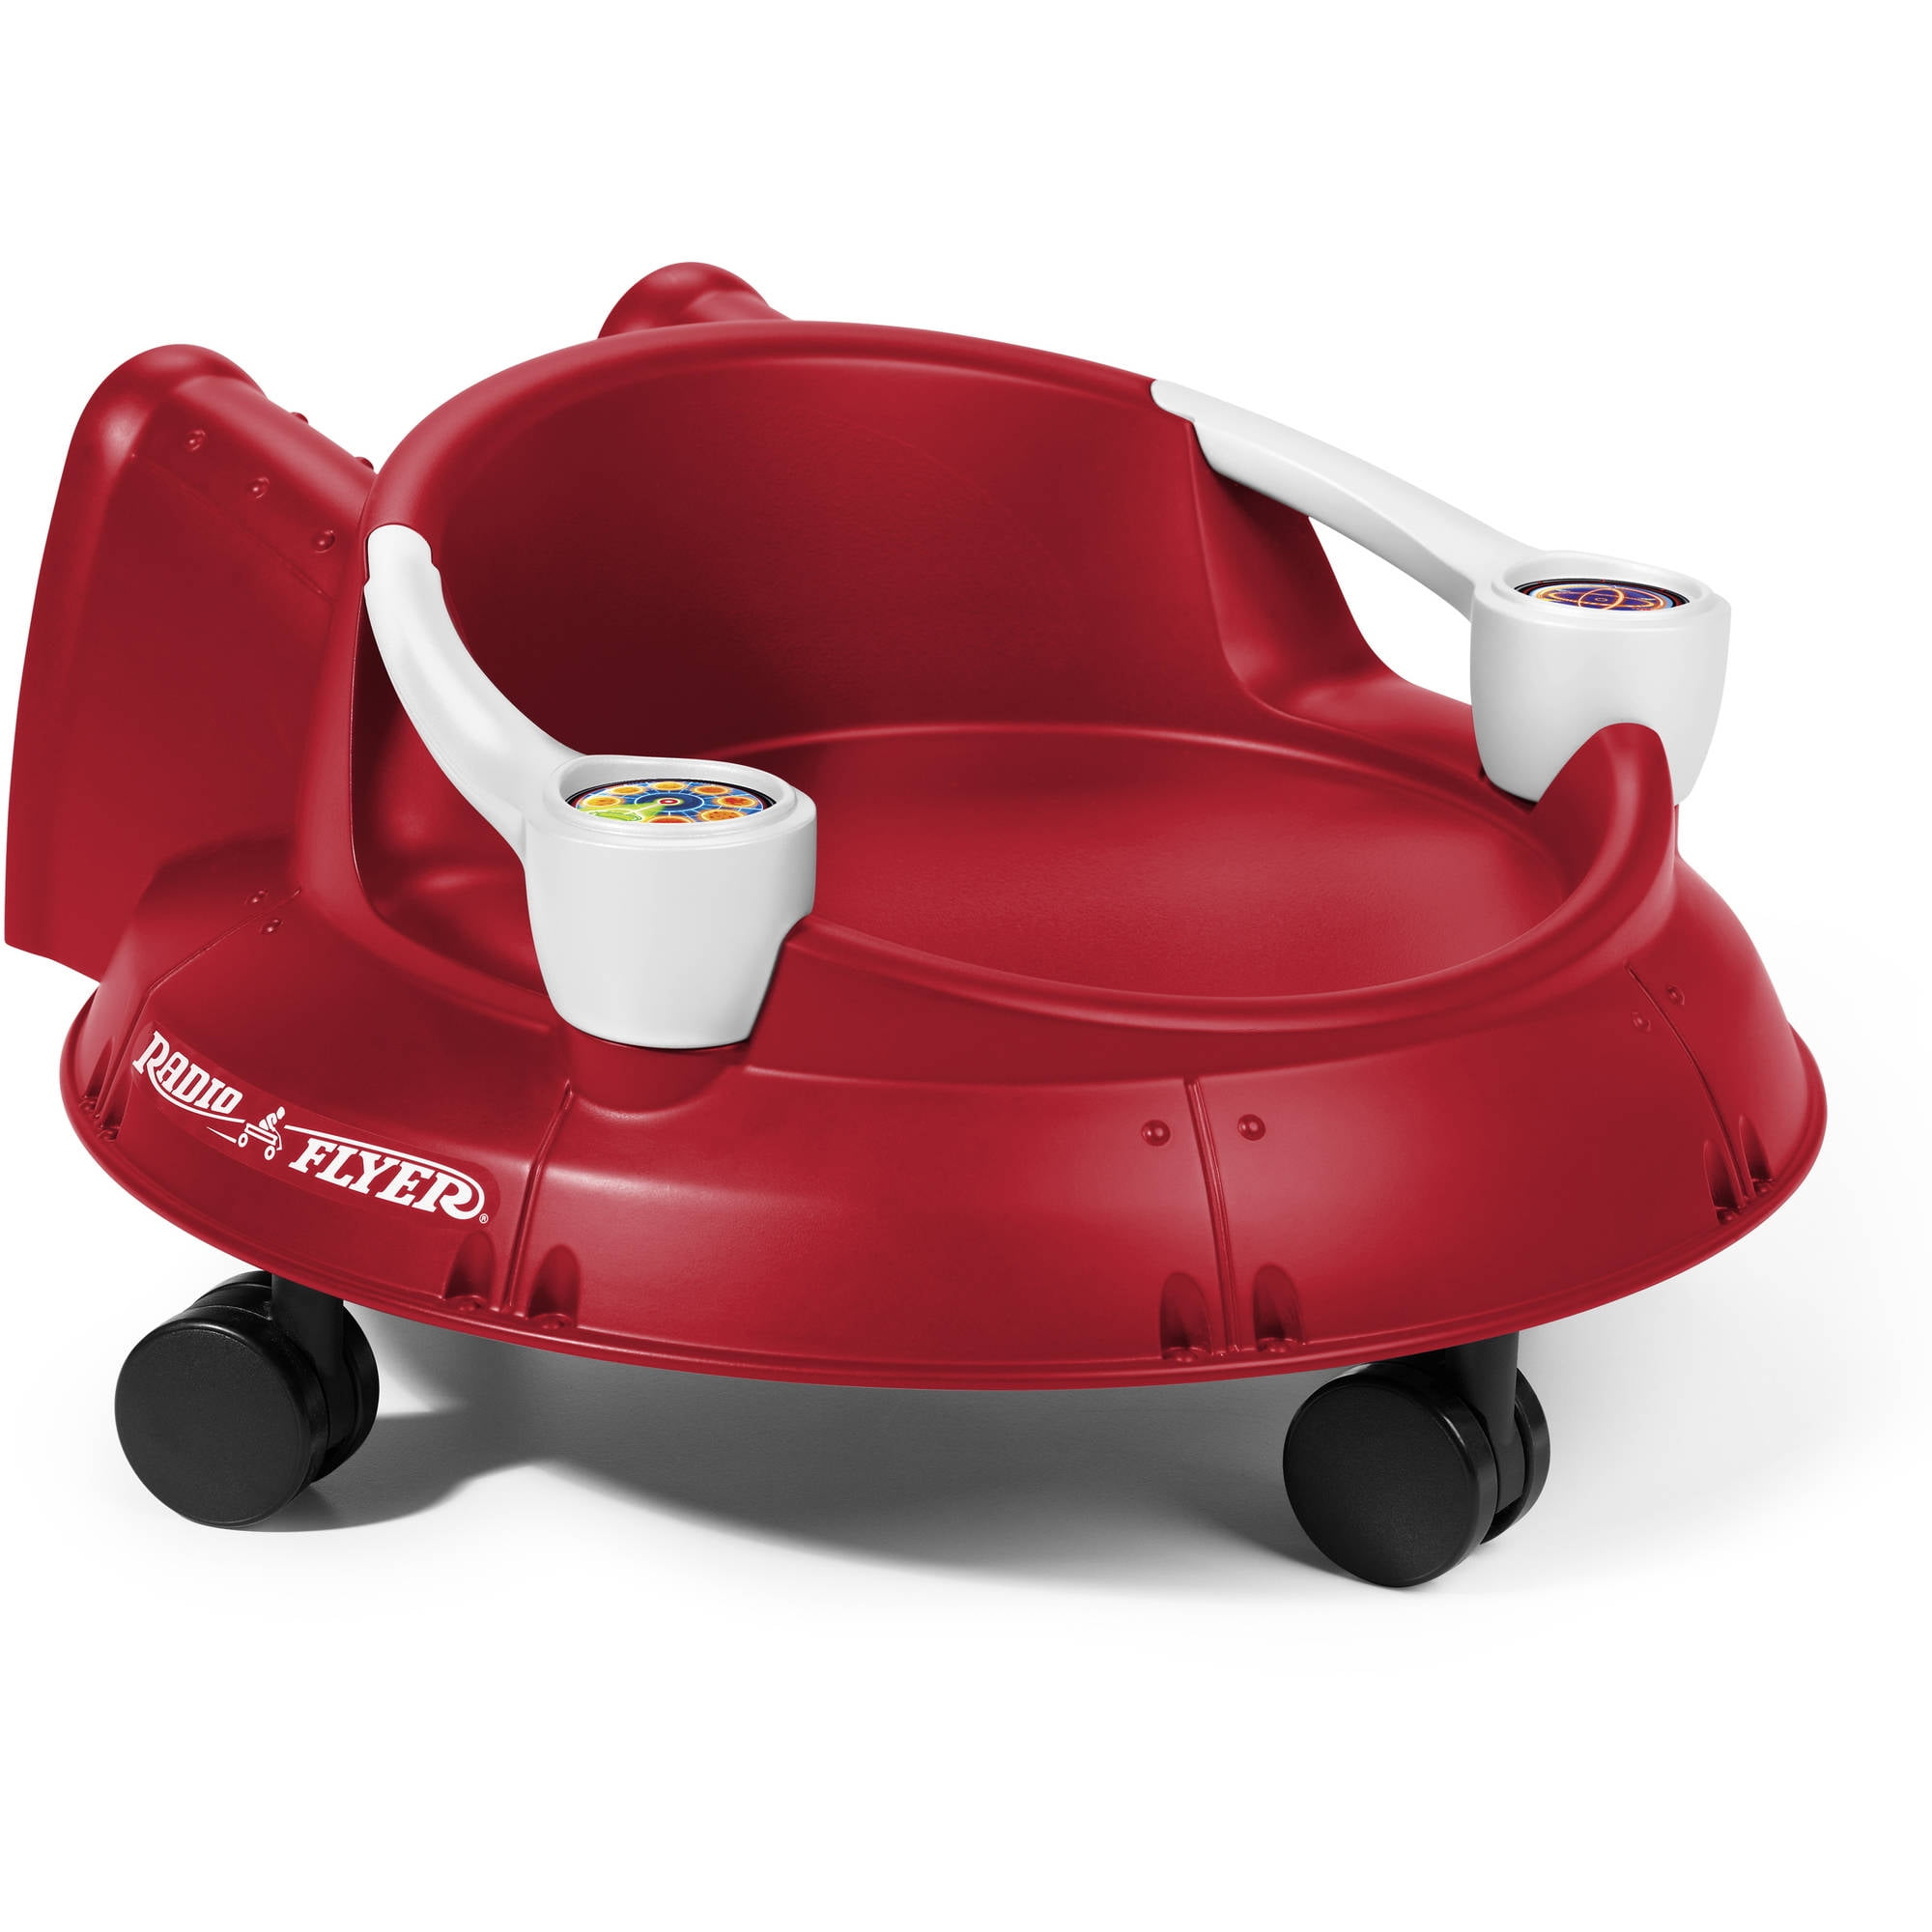 radio flyer scooter ride on